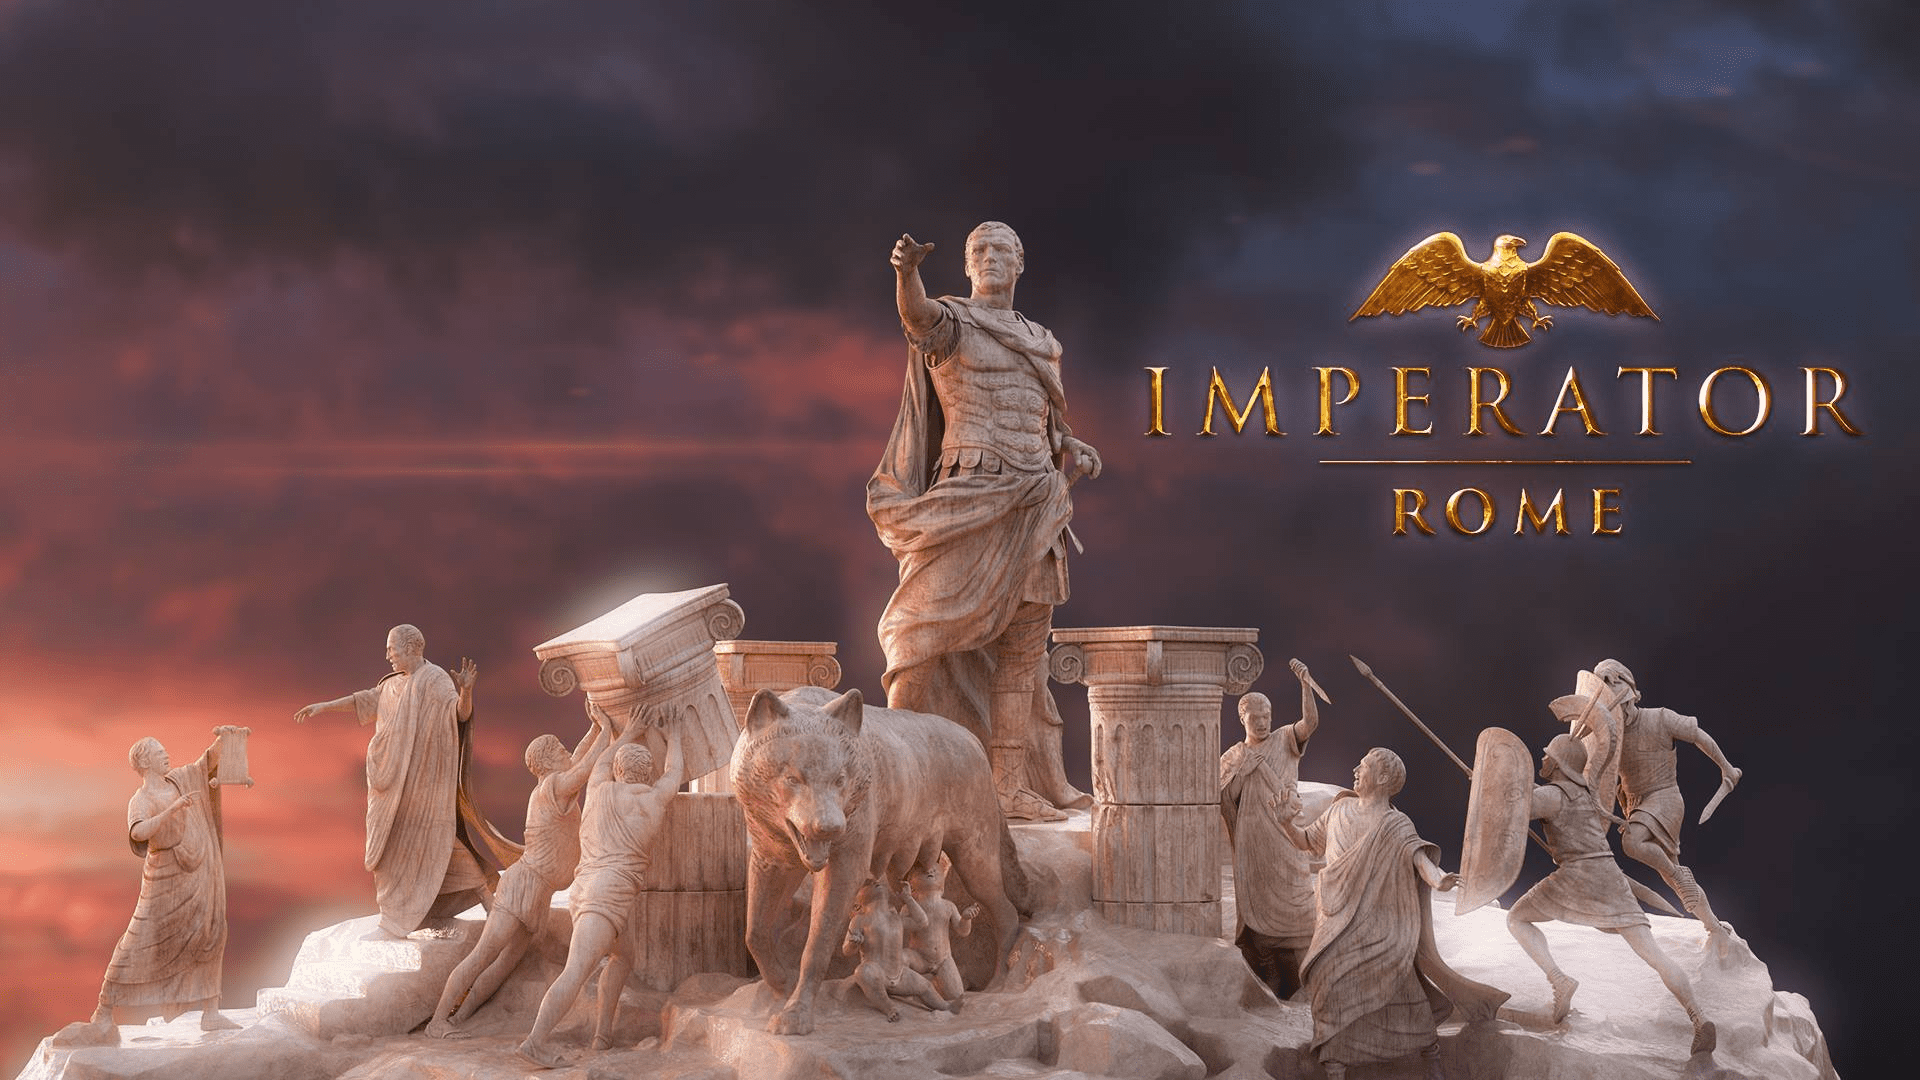 Imperator: Rome Update (Menander) & Epirus Content Pack Makes a Great Game Even Better